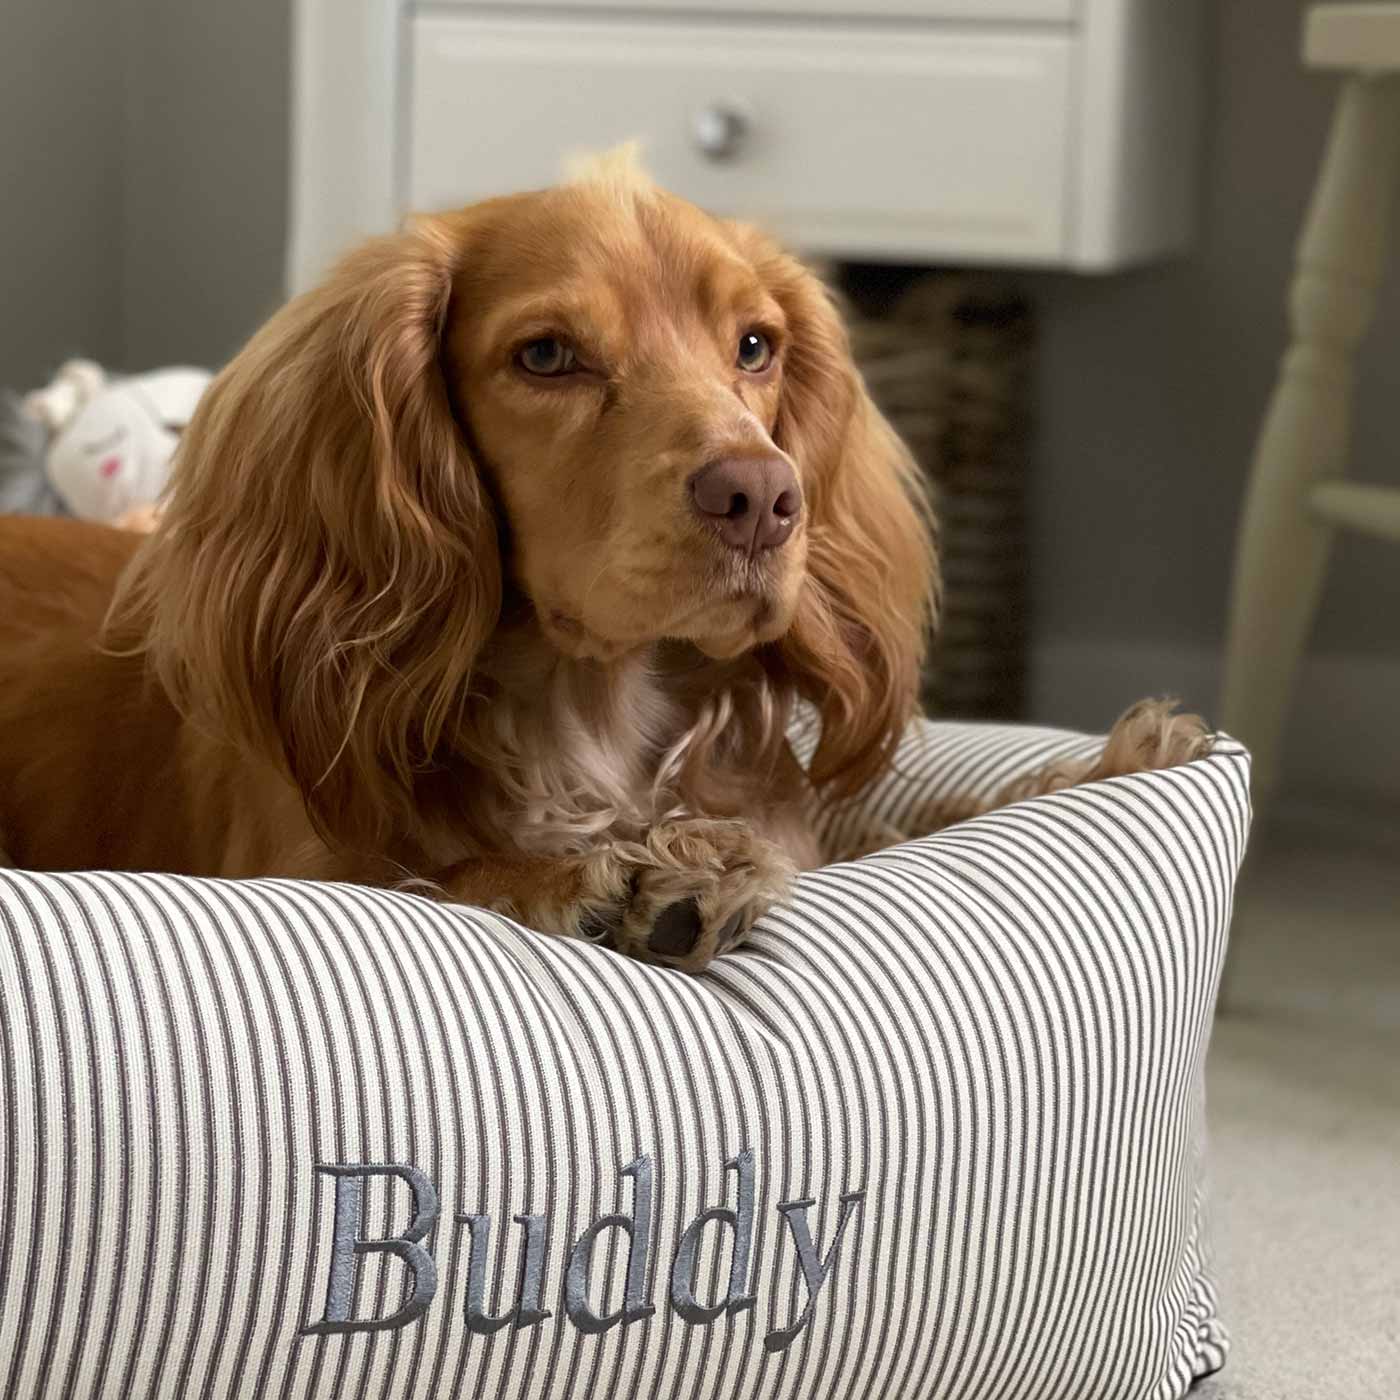 Luxury Handmade Box Bed For Dogs, A Regency Stripe Dog Box Bed, Perfect For Your Pets Nap Time! Available To Personalise at Lords & Labradors